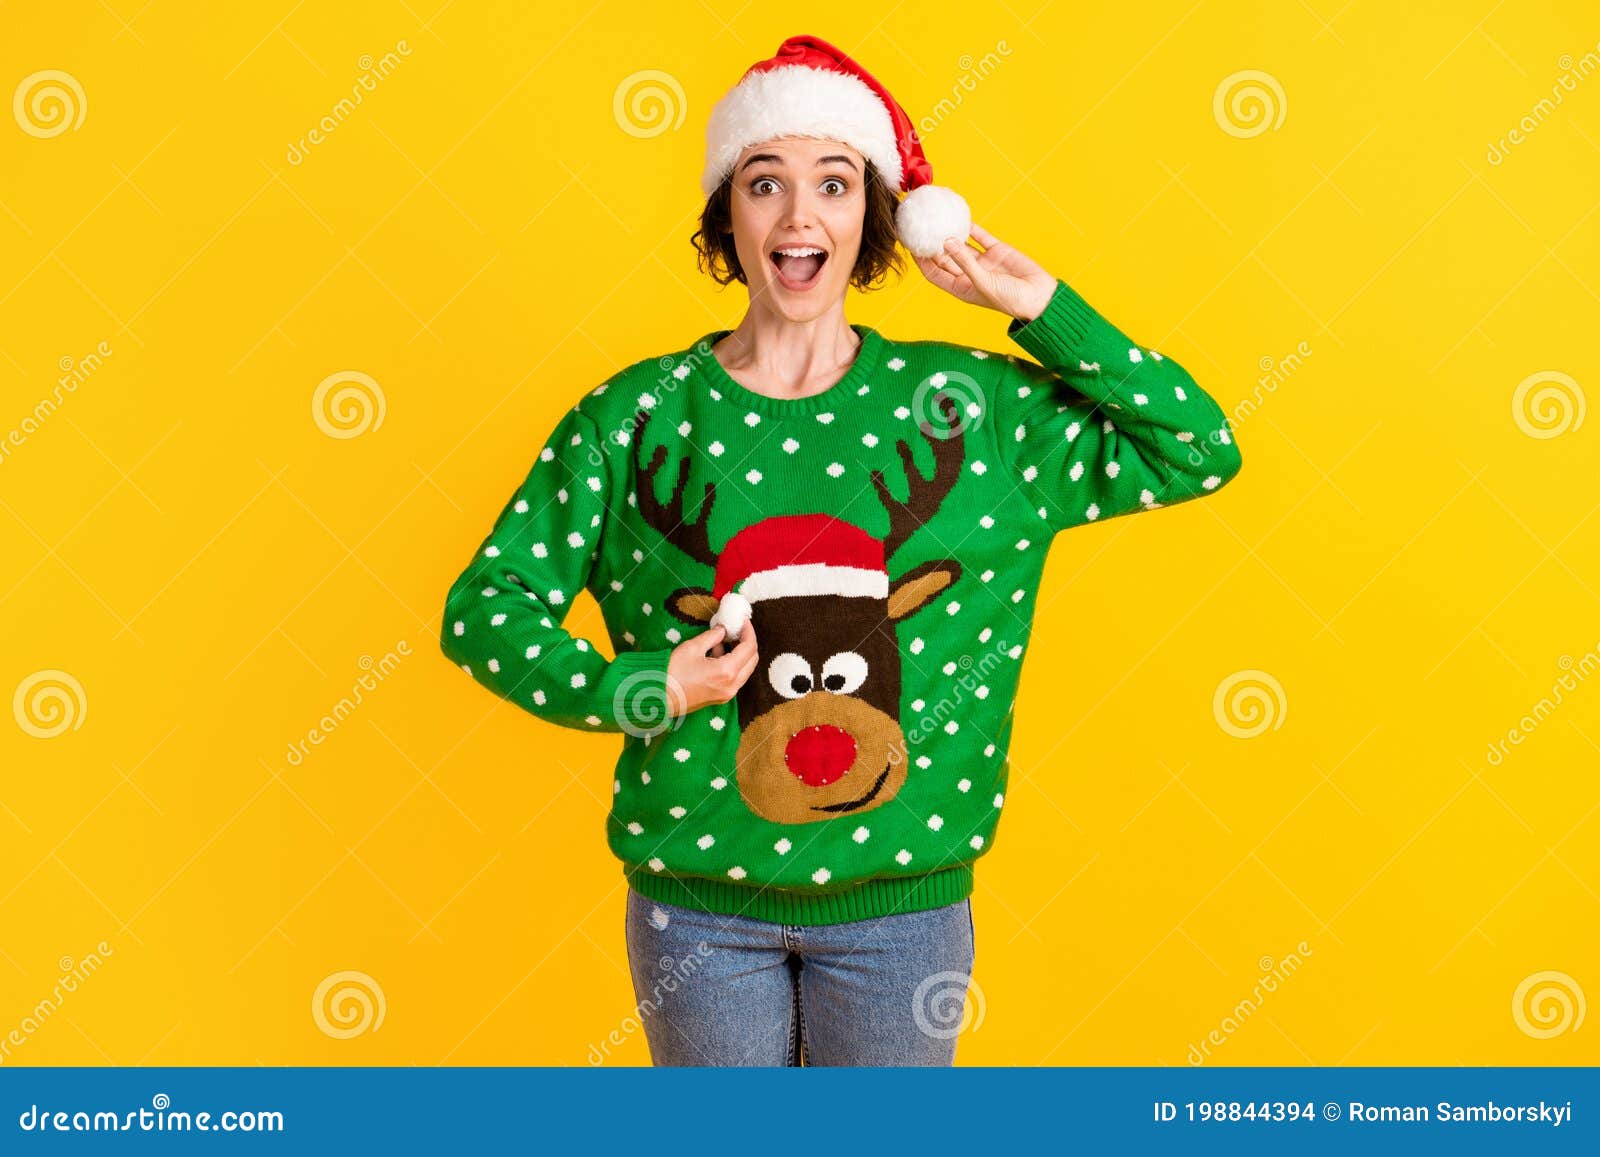 crazy girl ready x-mas christmas atmosphere theme party hold pompon headwear redindeer decor sweater jumper impressed